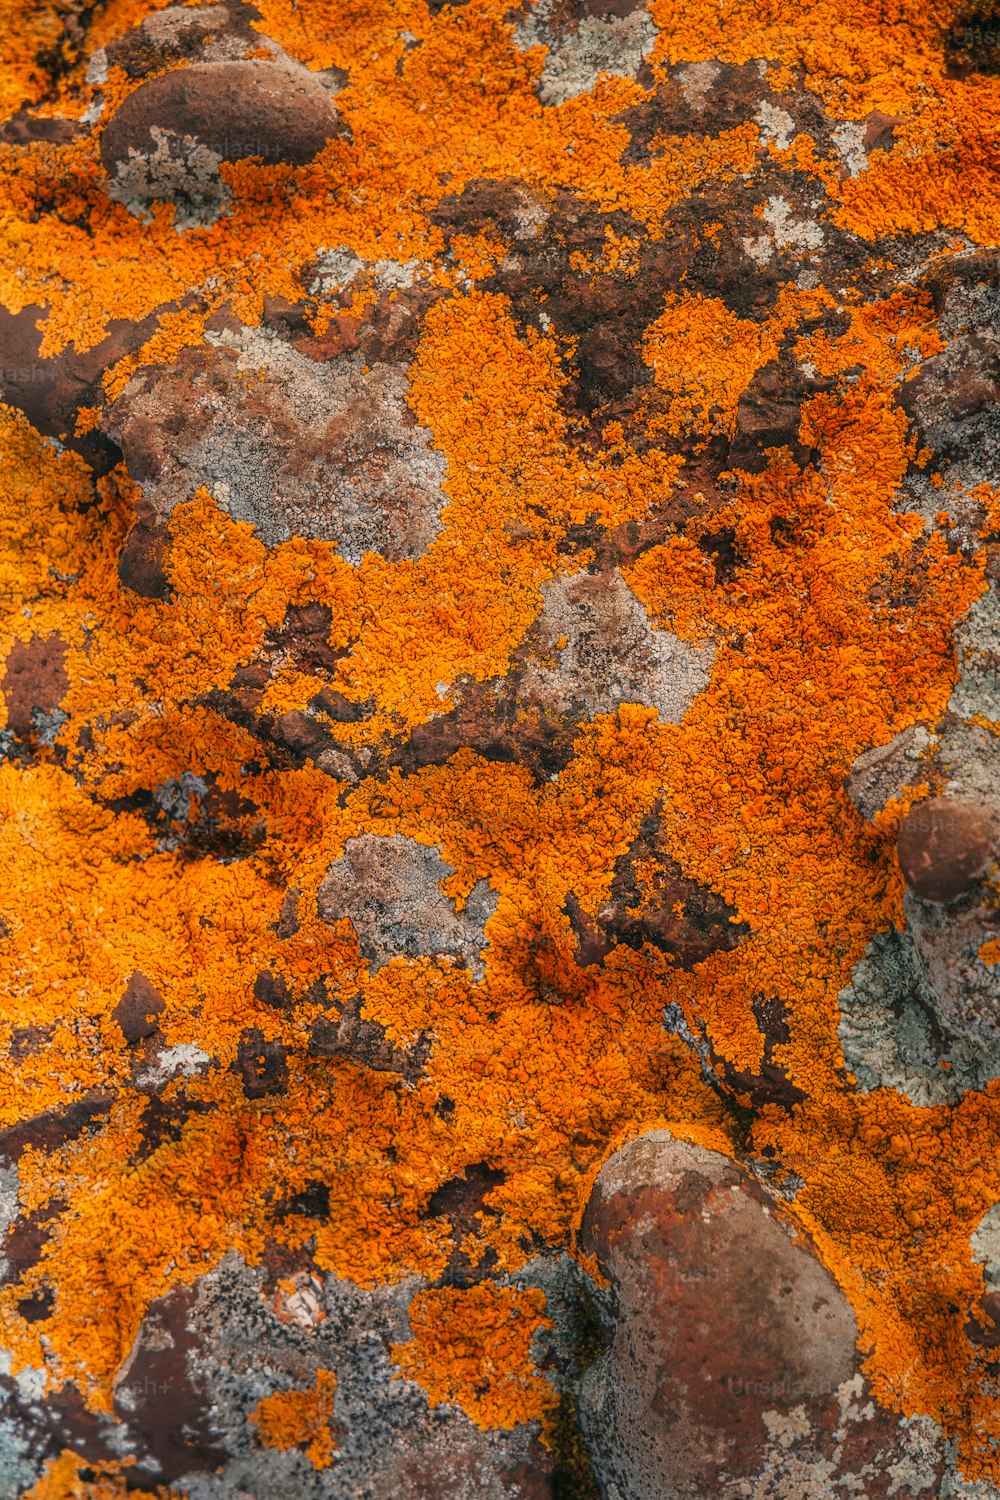 a close up of a rock with orange lichen on it